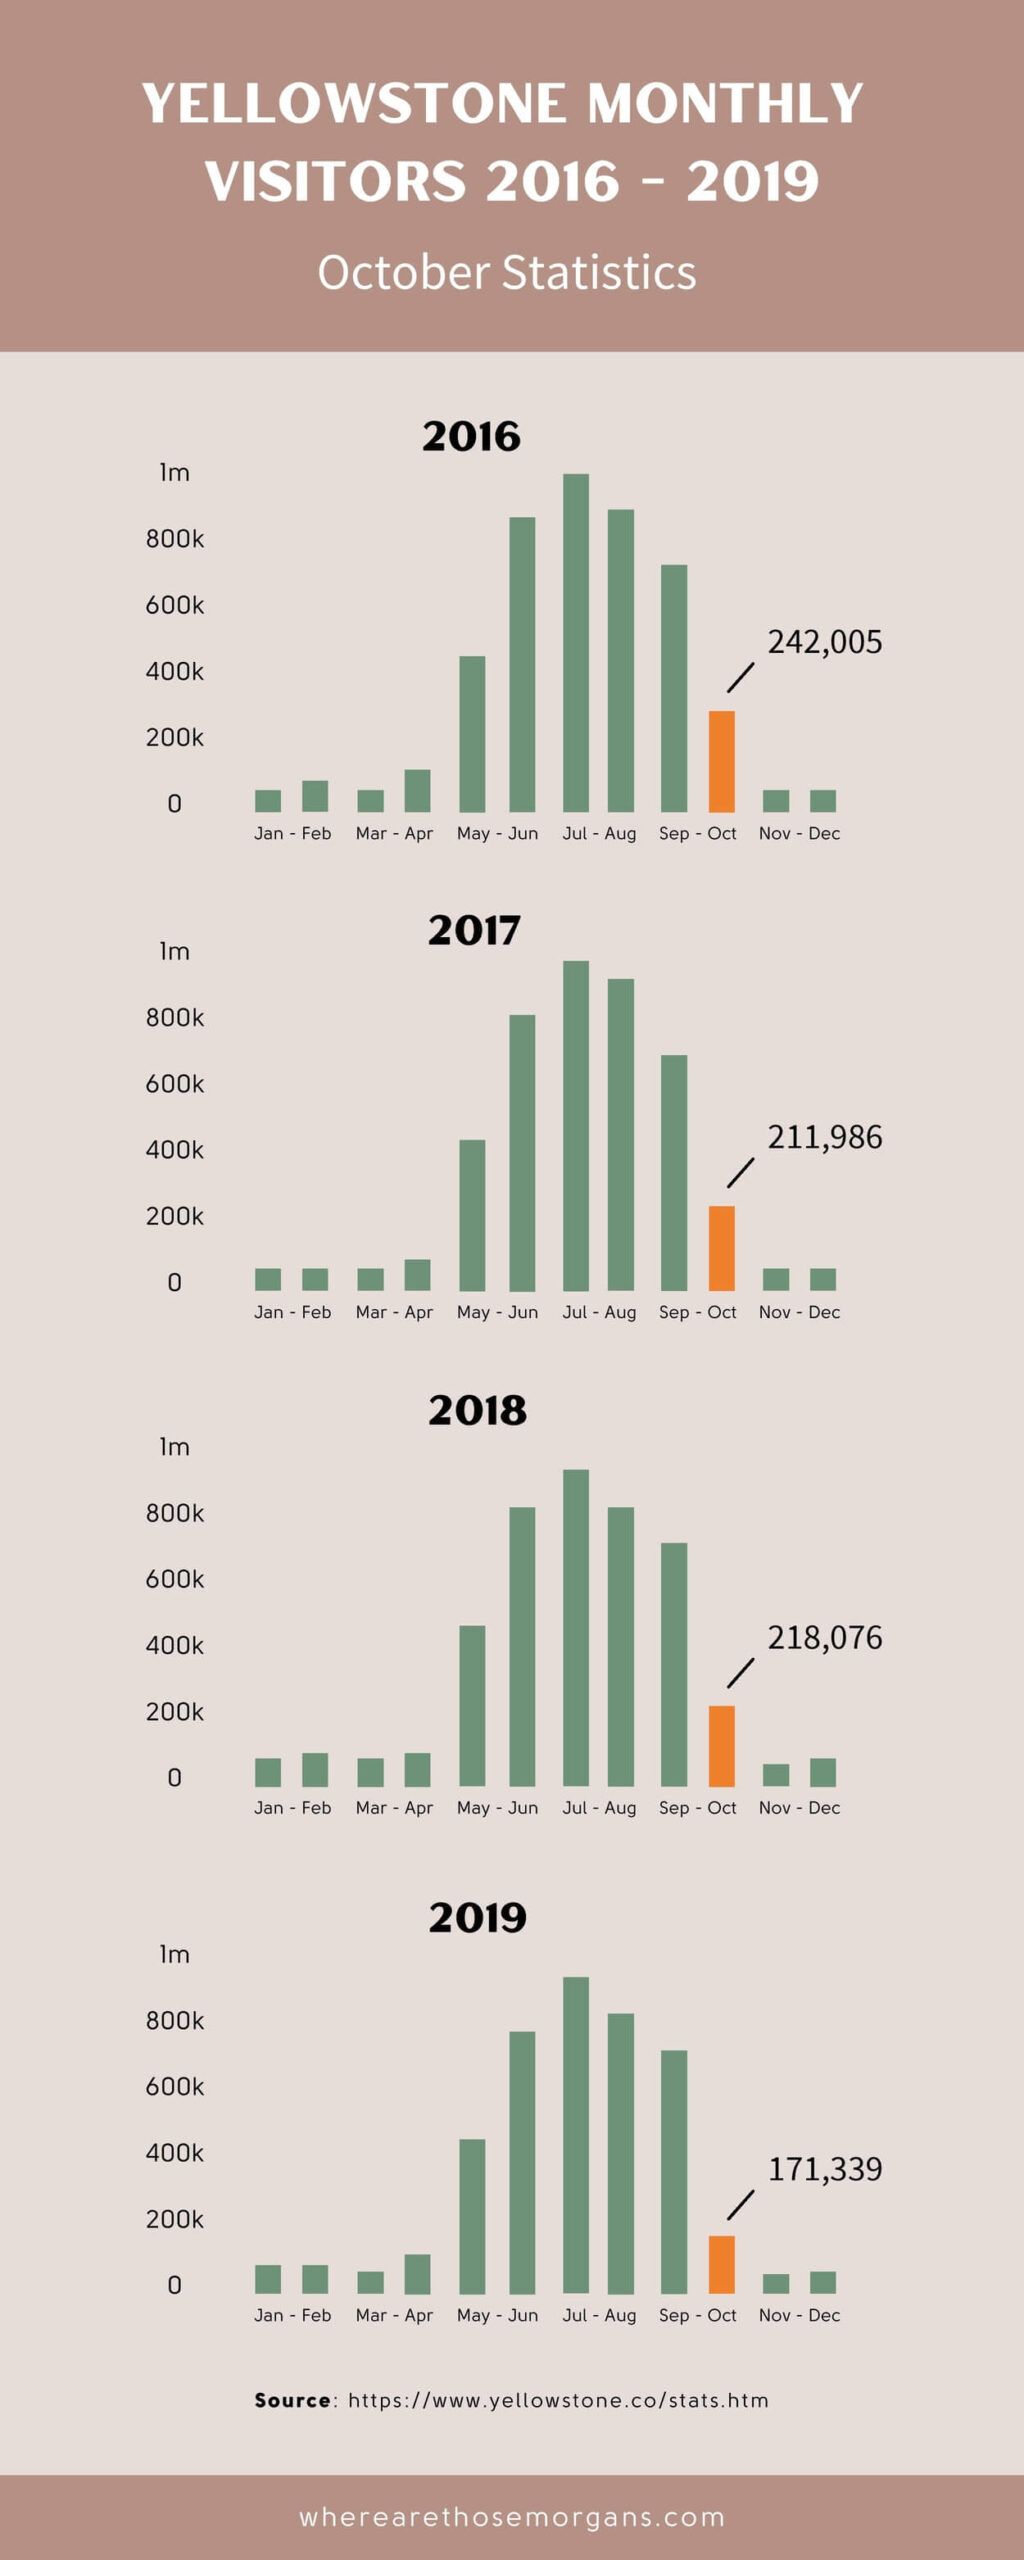 Infographic showing visitor numbers to Yellowstone National Park in october each year between 2016 and 2019 versus every other month of the year